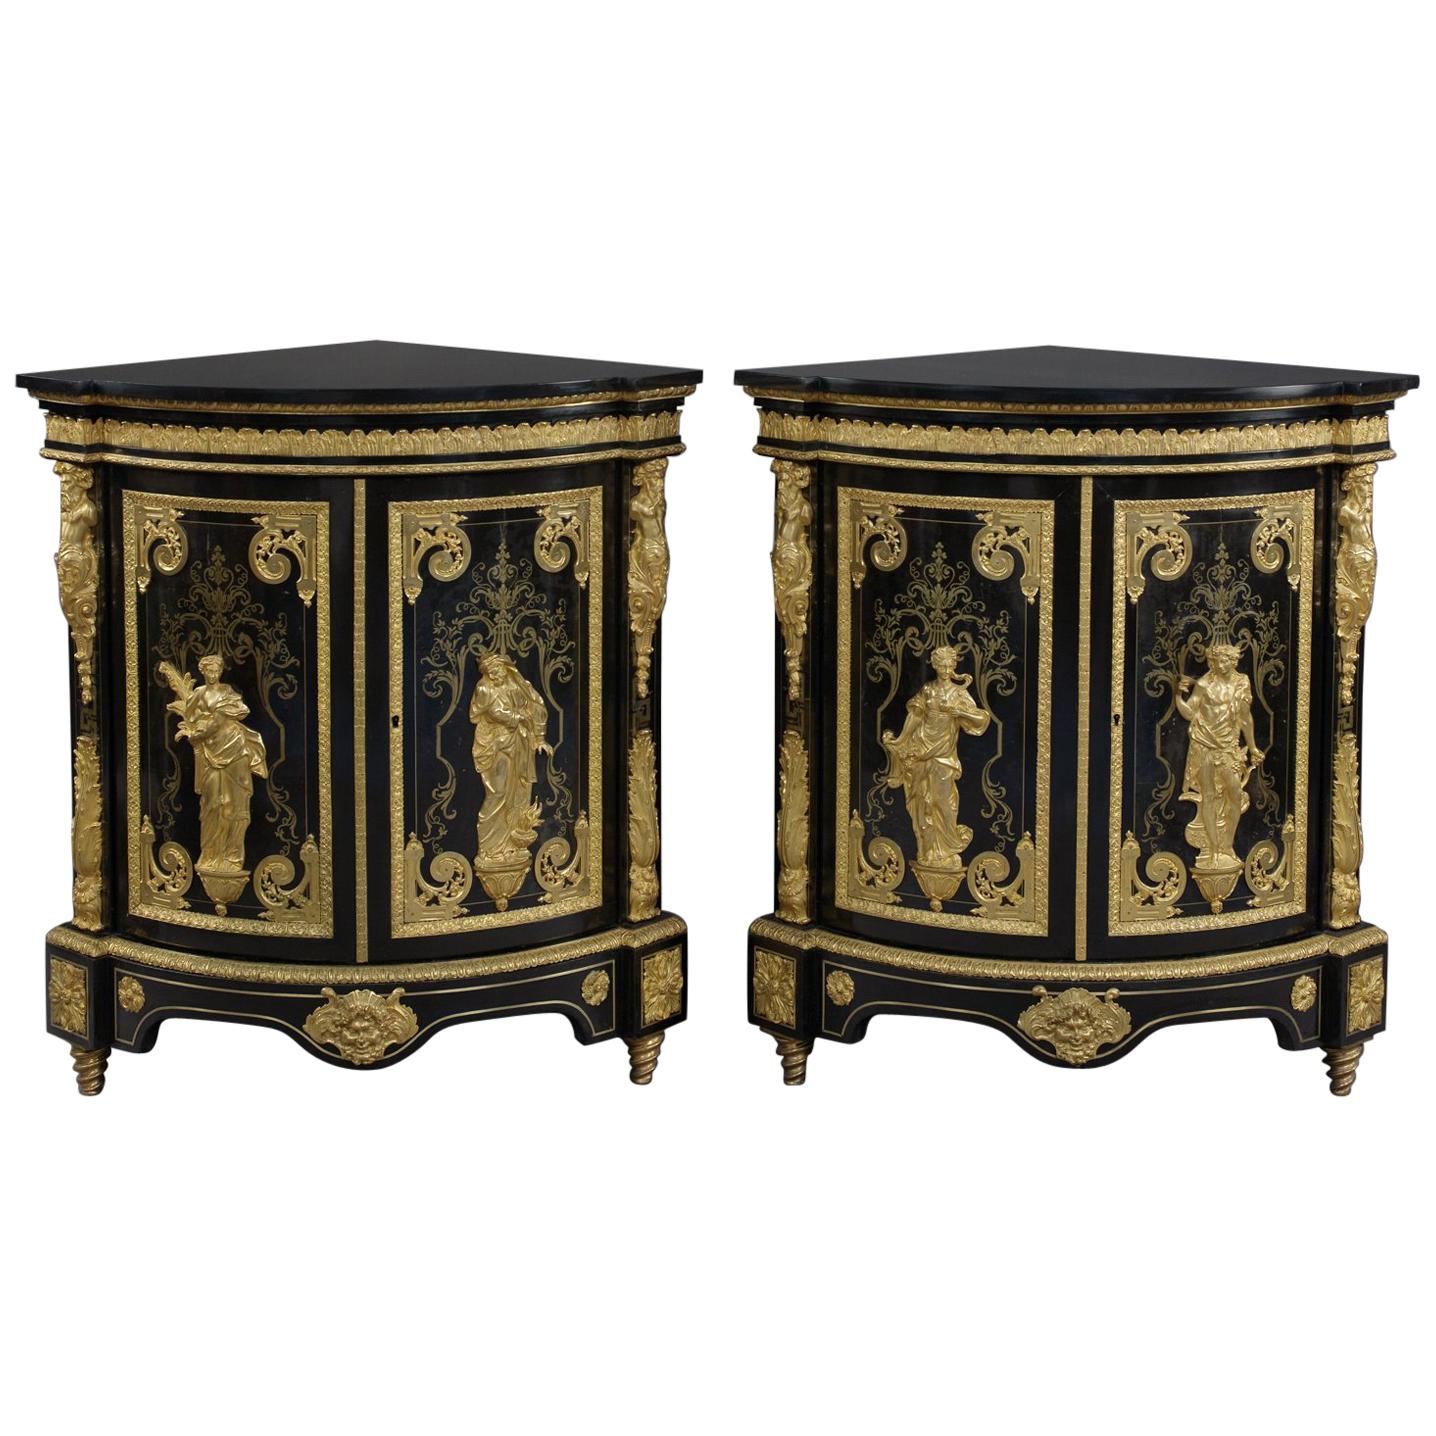 Pair of Boulle Marquetry Inlaid Corner Cabinets by Béfort Jeune, circa 1870